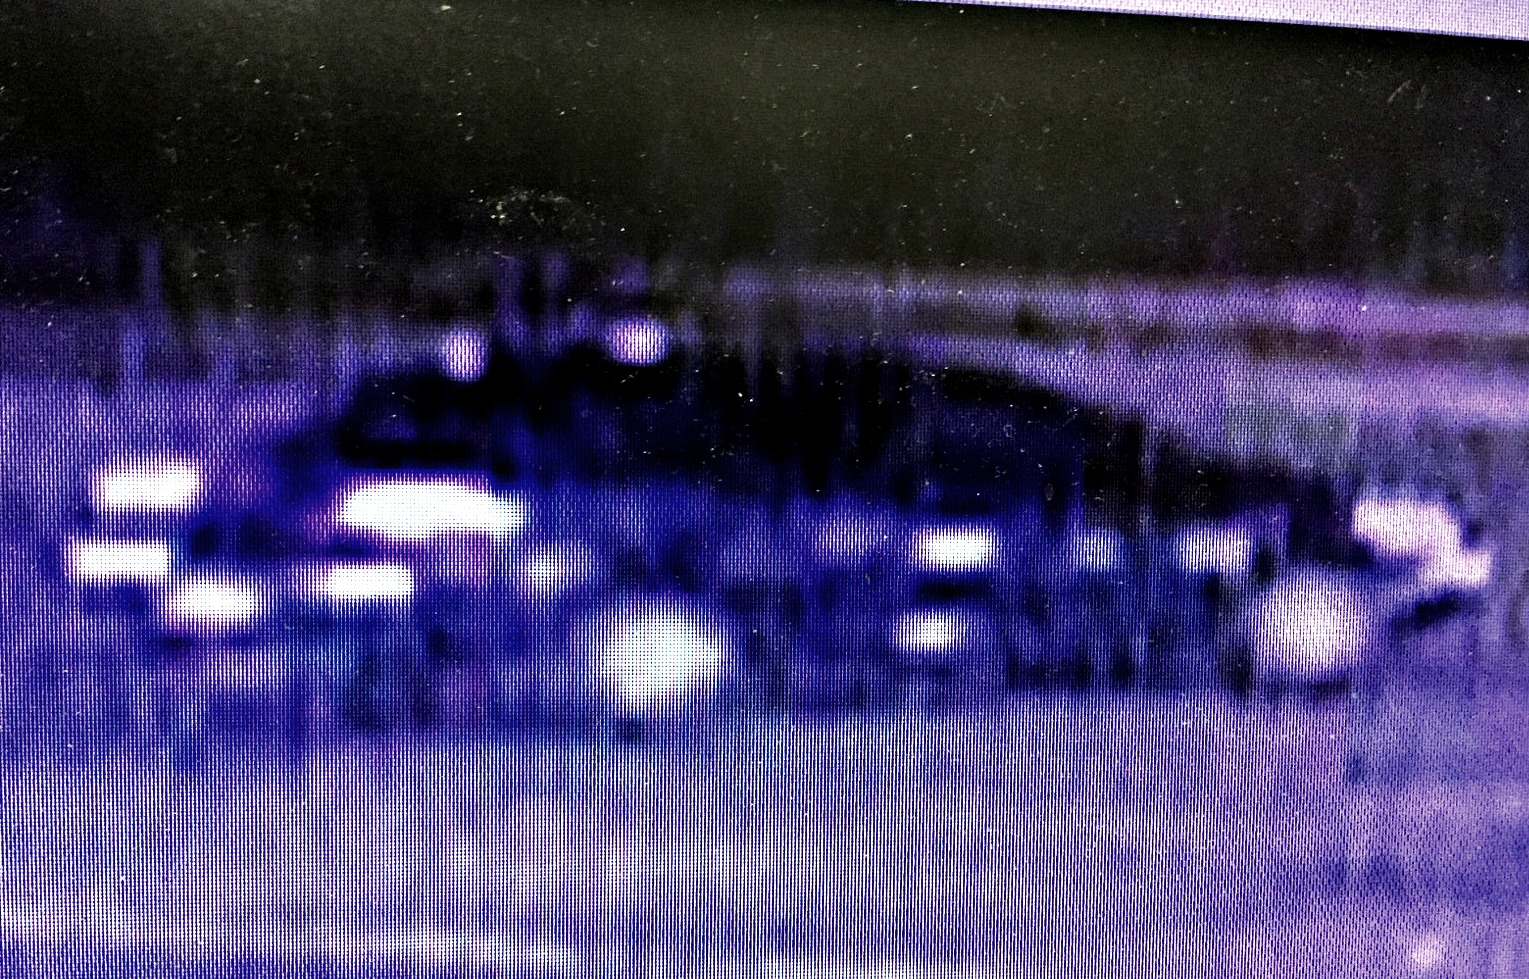 The suspect vehicle was captured on a surveillance camera. 